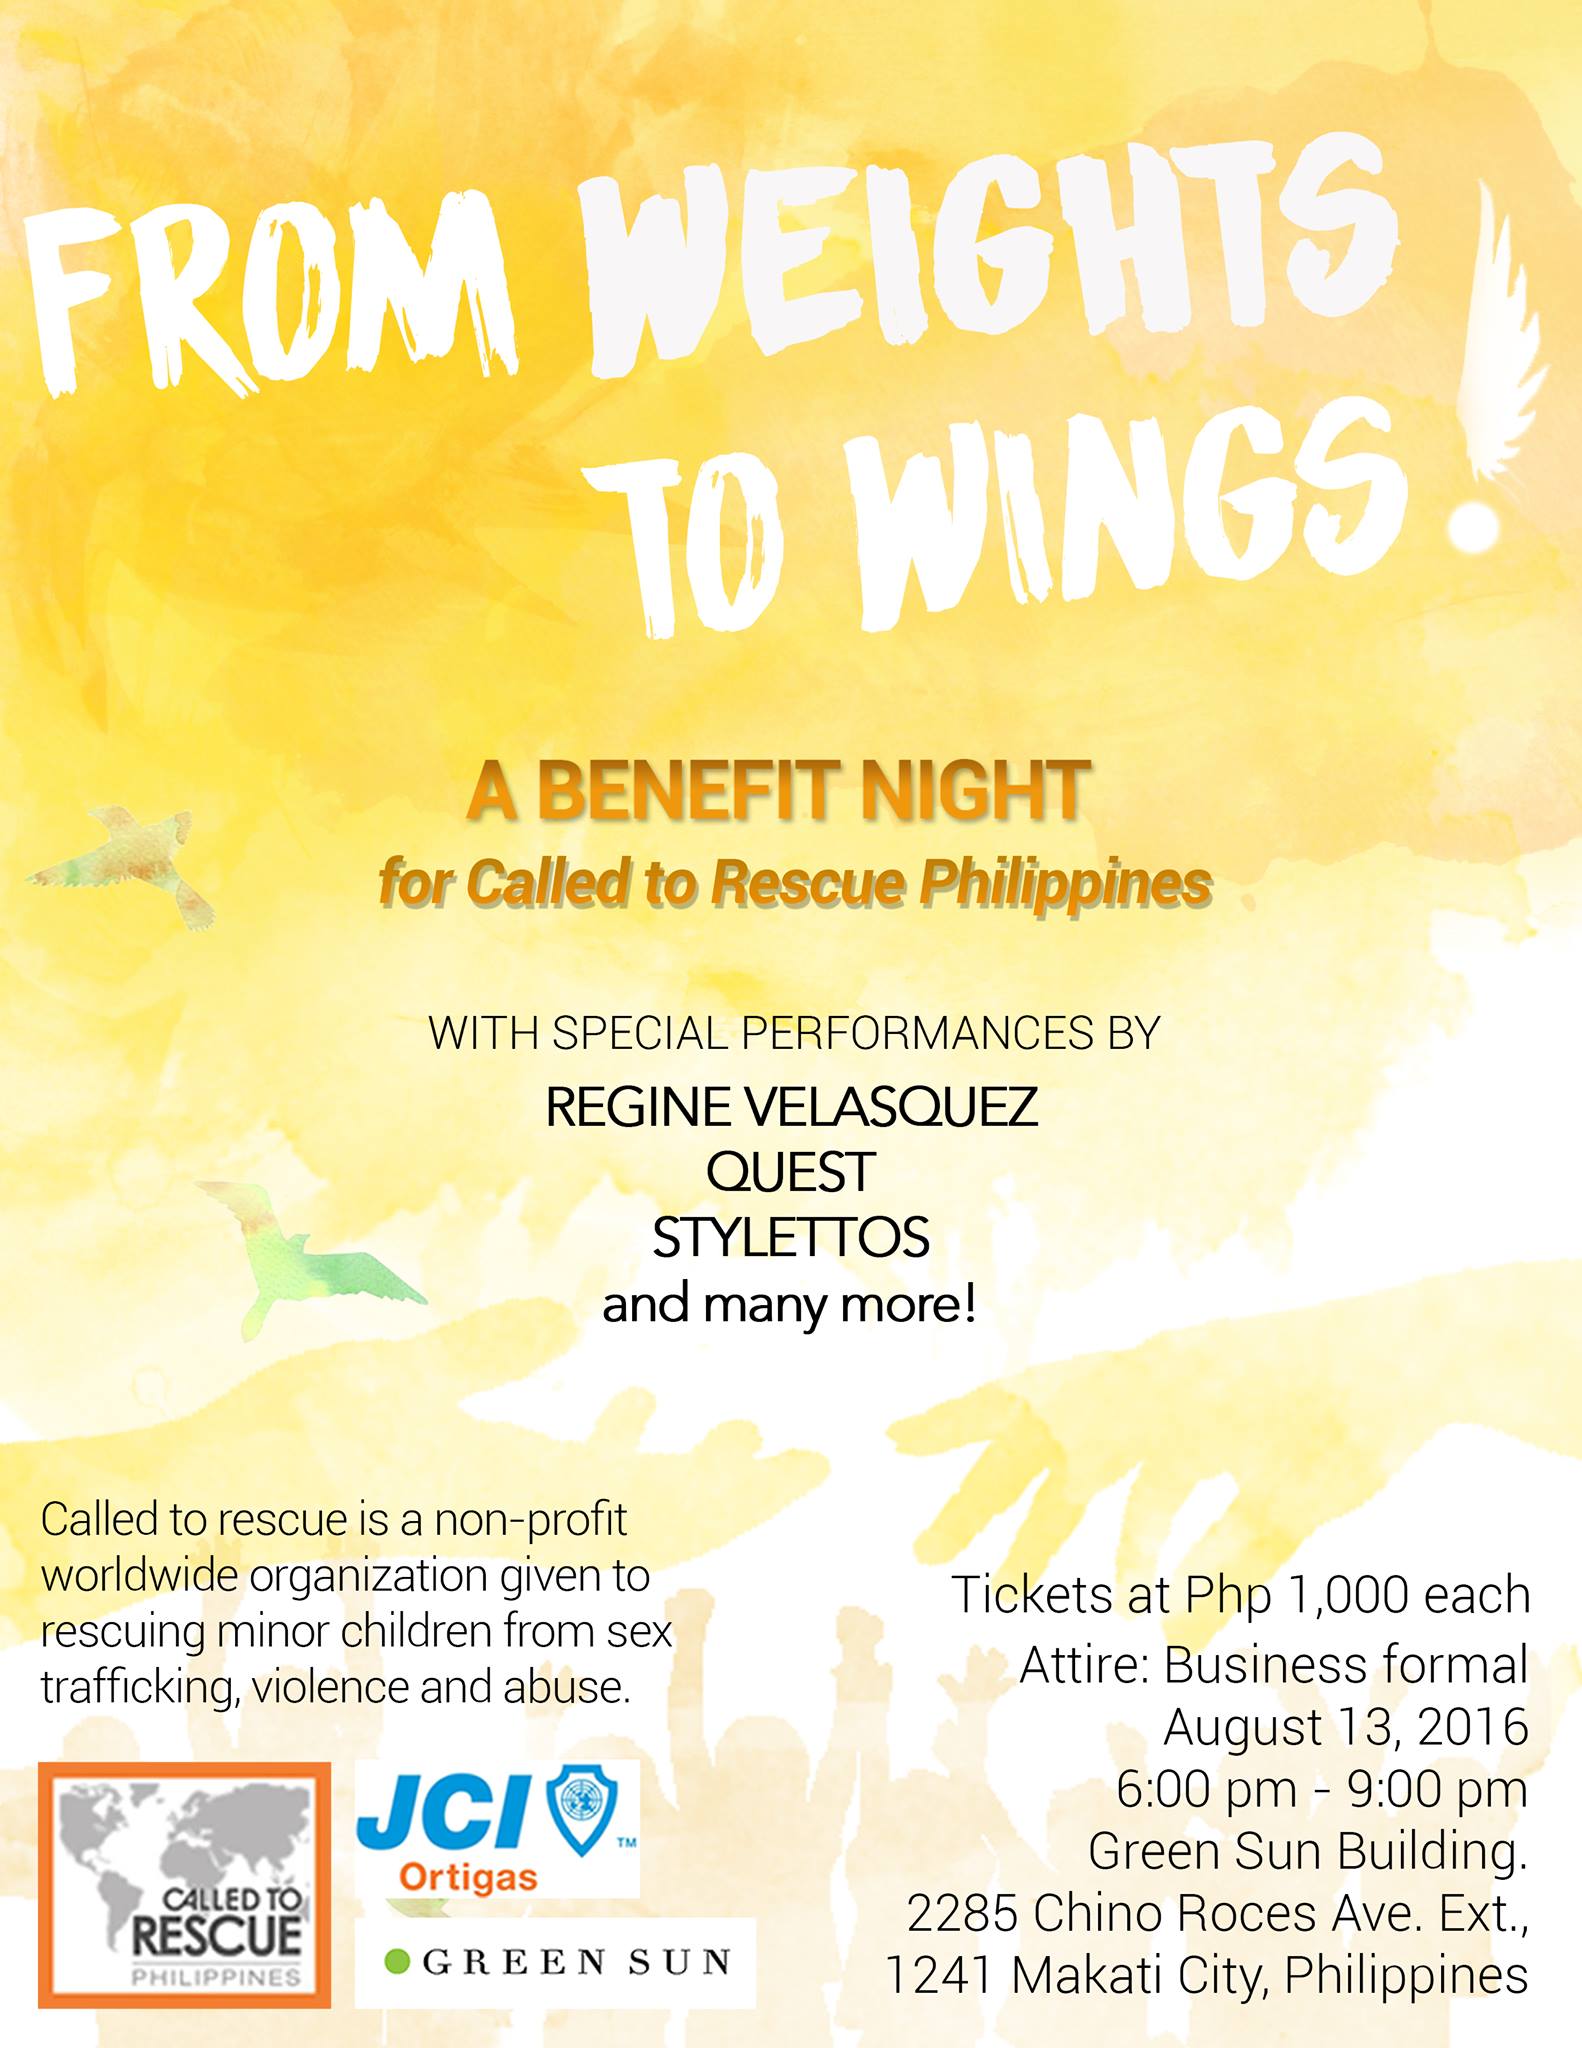 From Weights to Wings! clock Tomorrow at 6 PM - 9 PM Tomorrow · 79–84° Heavy Thunderstorm pin Show Map Green Sun 2285 Chino Roces Avenue (Pasong Tamo Extension), Makati, 1231 Makati, Philippines envelope Invited by Catherine Ocariz About Discussion Write Post Add Photo / Video Create Poll Details Did you know Human trafficking is the 3rd largest international crime industry (behind illegal drugs and arms trafficking) generating almost $32 billion every year? Every year around 10 million Filipinos are being trafficked globally. Join us this August 13, 2016 6-9pm at Green Sun Makati for a special Benefit Night for Called to Rescue, our fight against human trafficking. Get serenaded by Asia's Songbird and other notable performers, participate in celebrity auctions, and engage with some of our beneficiaries. Also get a chance to meet our surprise UFC fighter. Hear their moving stories and see how else you can combat human trafficking. Tickets are only P1,000 help us fight this now! Reserve your tickets here: http://bit.ly/2aEuL9L -------------------------------------------------------------------------------------- Called To Rescue is a nonprofit organization that helps rescue children who are missing, have been abused or trafficked. Called To Rescue also leads an awareness and prevention campaign to advocate for the protection of children victimized by abuse. A world where every child lives free from abuse, trafficking and homelessness. To know more about Called to Rescue Philippines, visit our website! http://www.calledtorescue.com.ph/